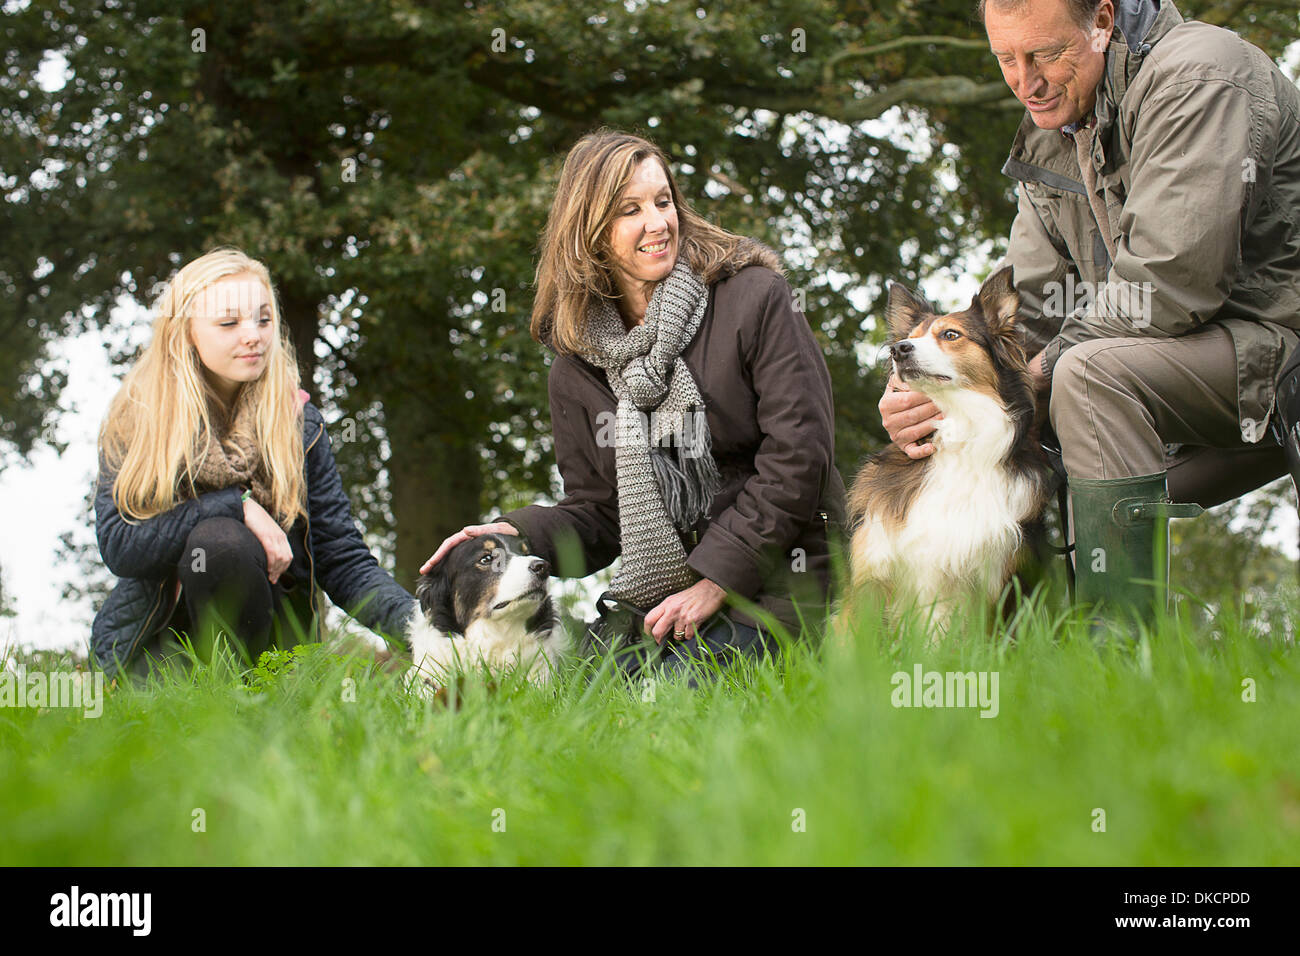 Senior couple and granddaughter out with dogs Stock Photo